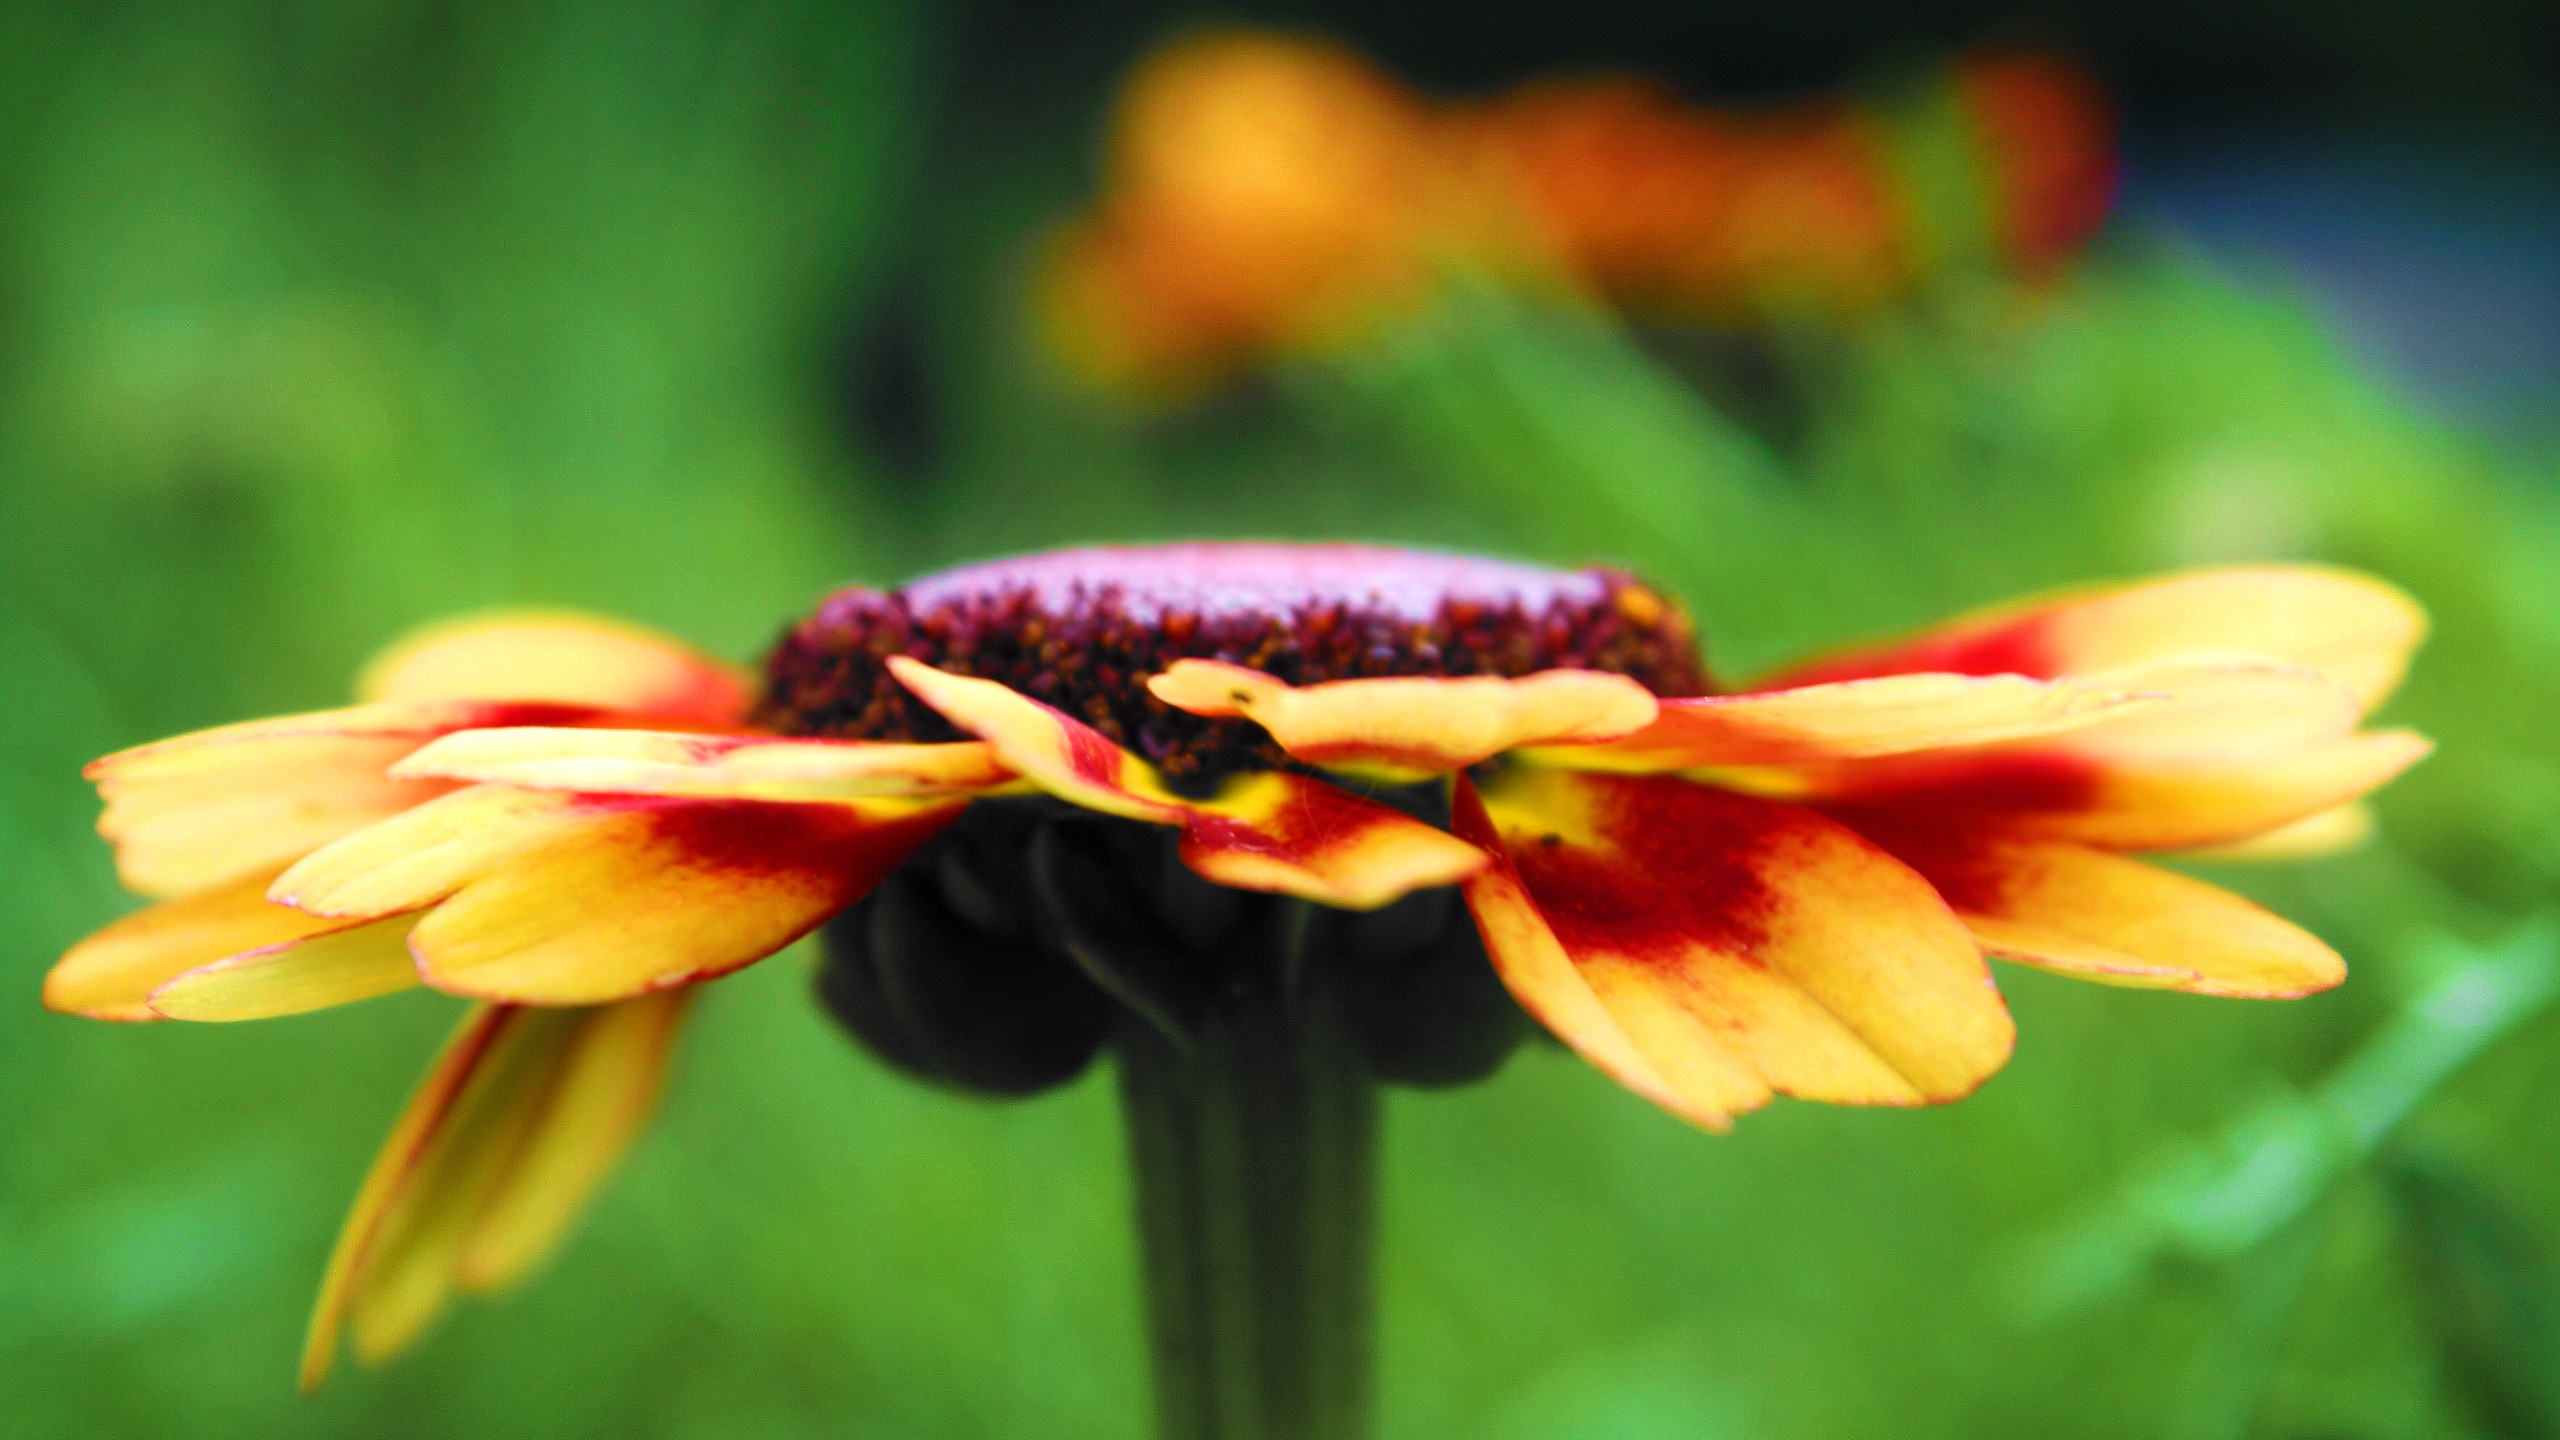 Yellow and Red Flower in Tilt Shift Lens. Wallpaper in 2560x1440 Resolution